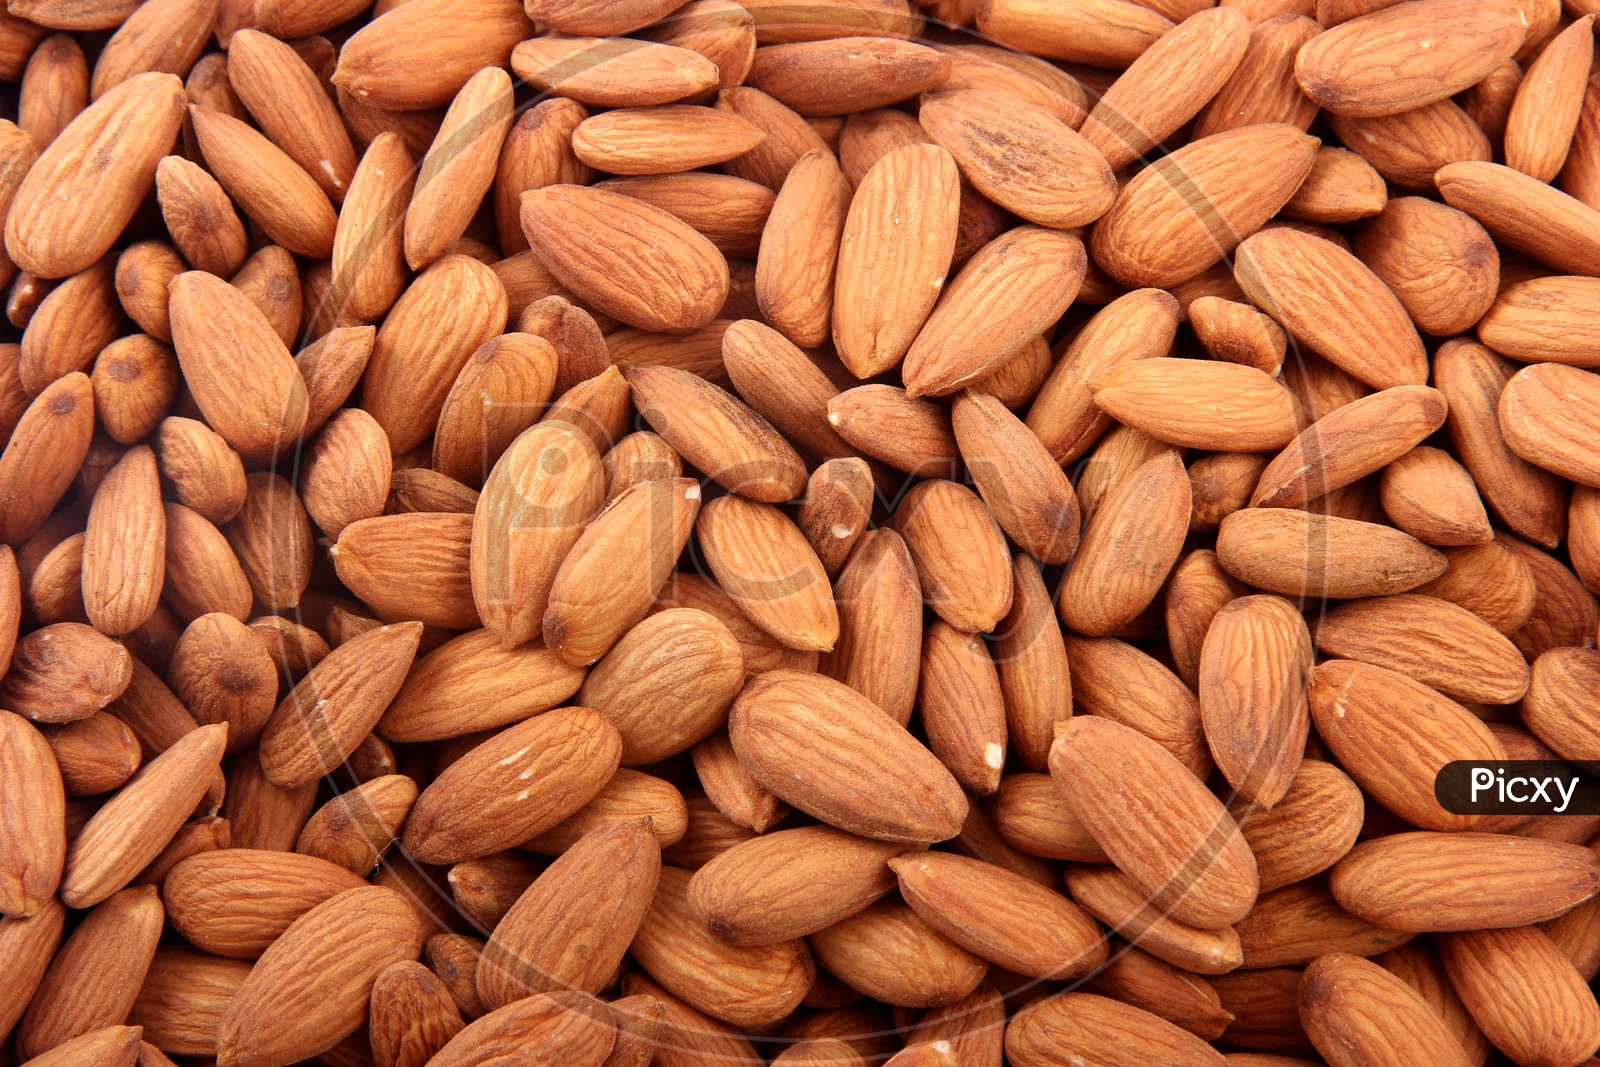 Almonds Situated Arbitrarily